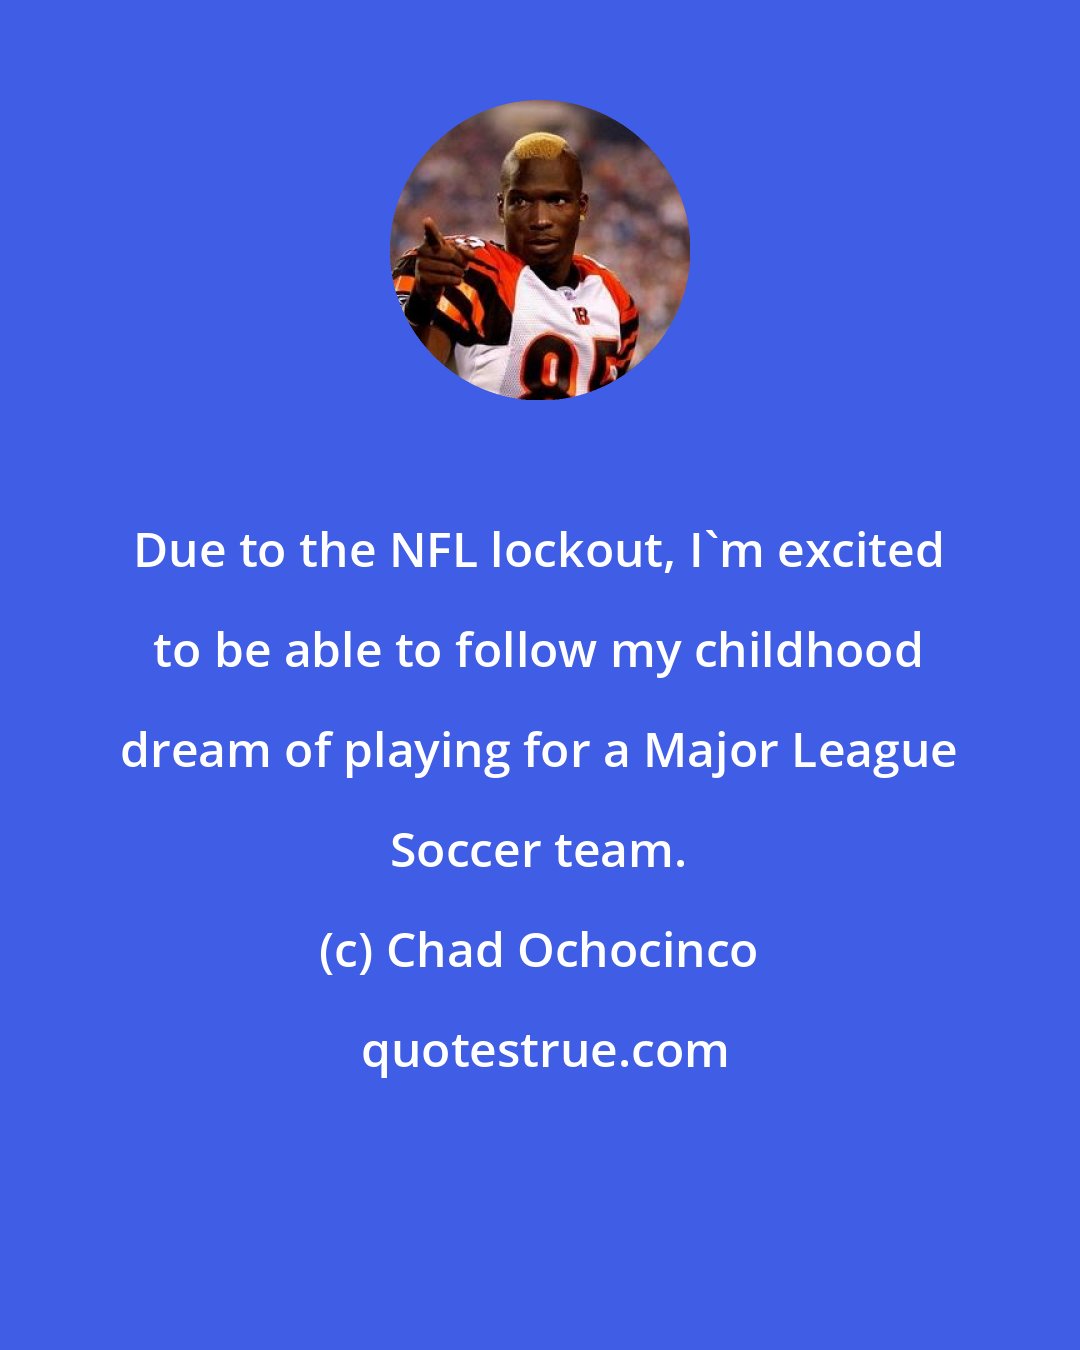 Chad Ochocinco: Due to the NFL lockout, I'm excited to be able to follow my childhood dream of playing for a Major League Soccer team.